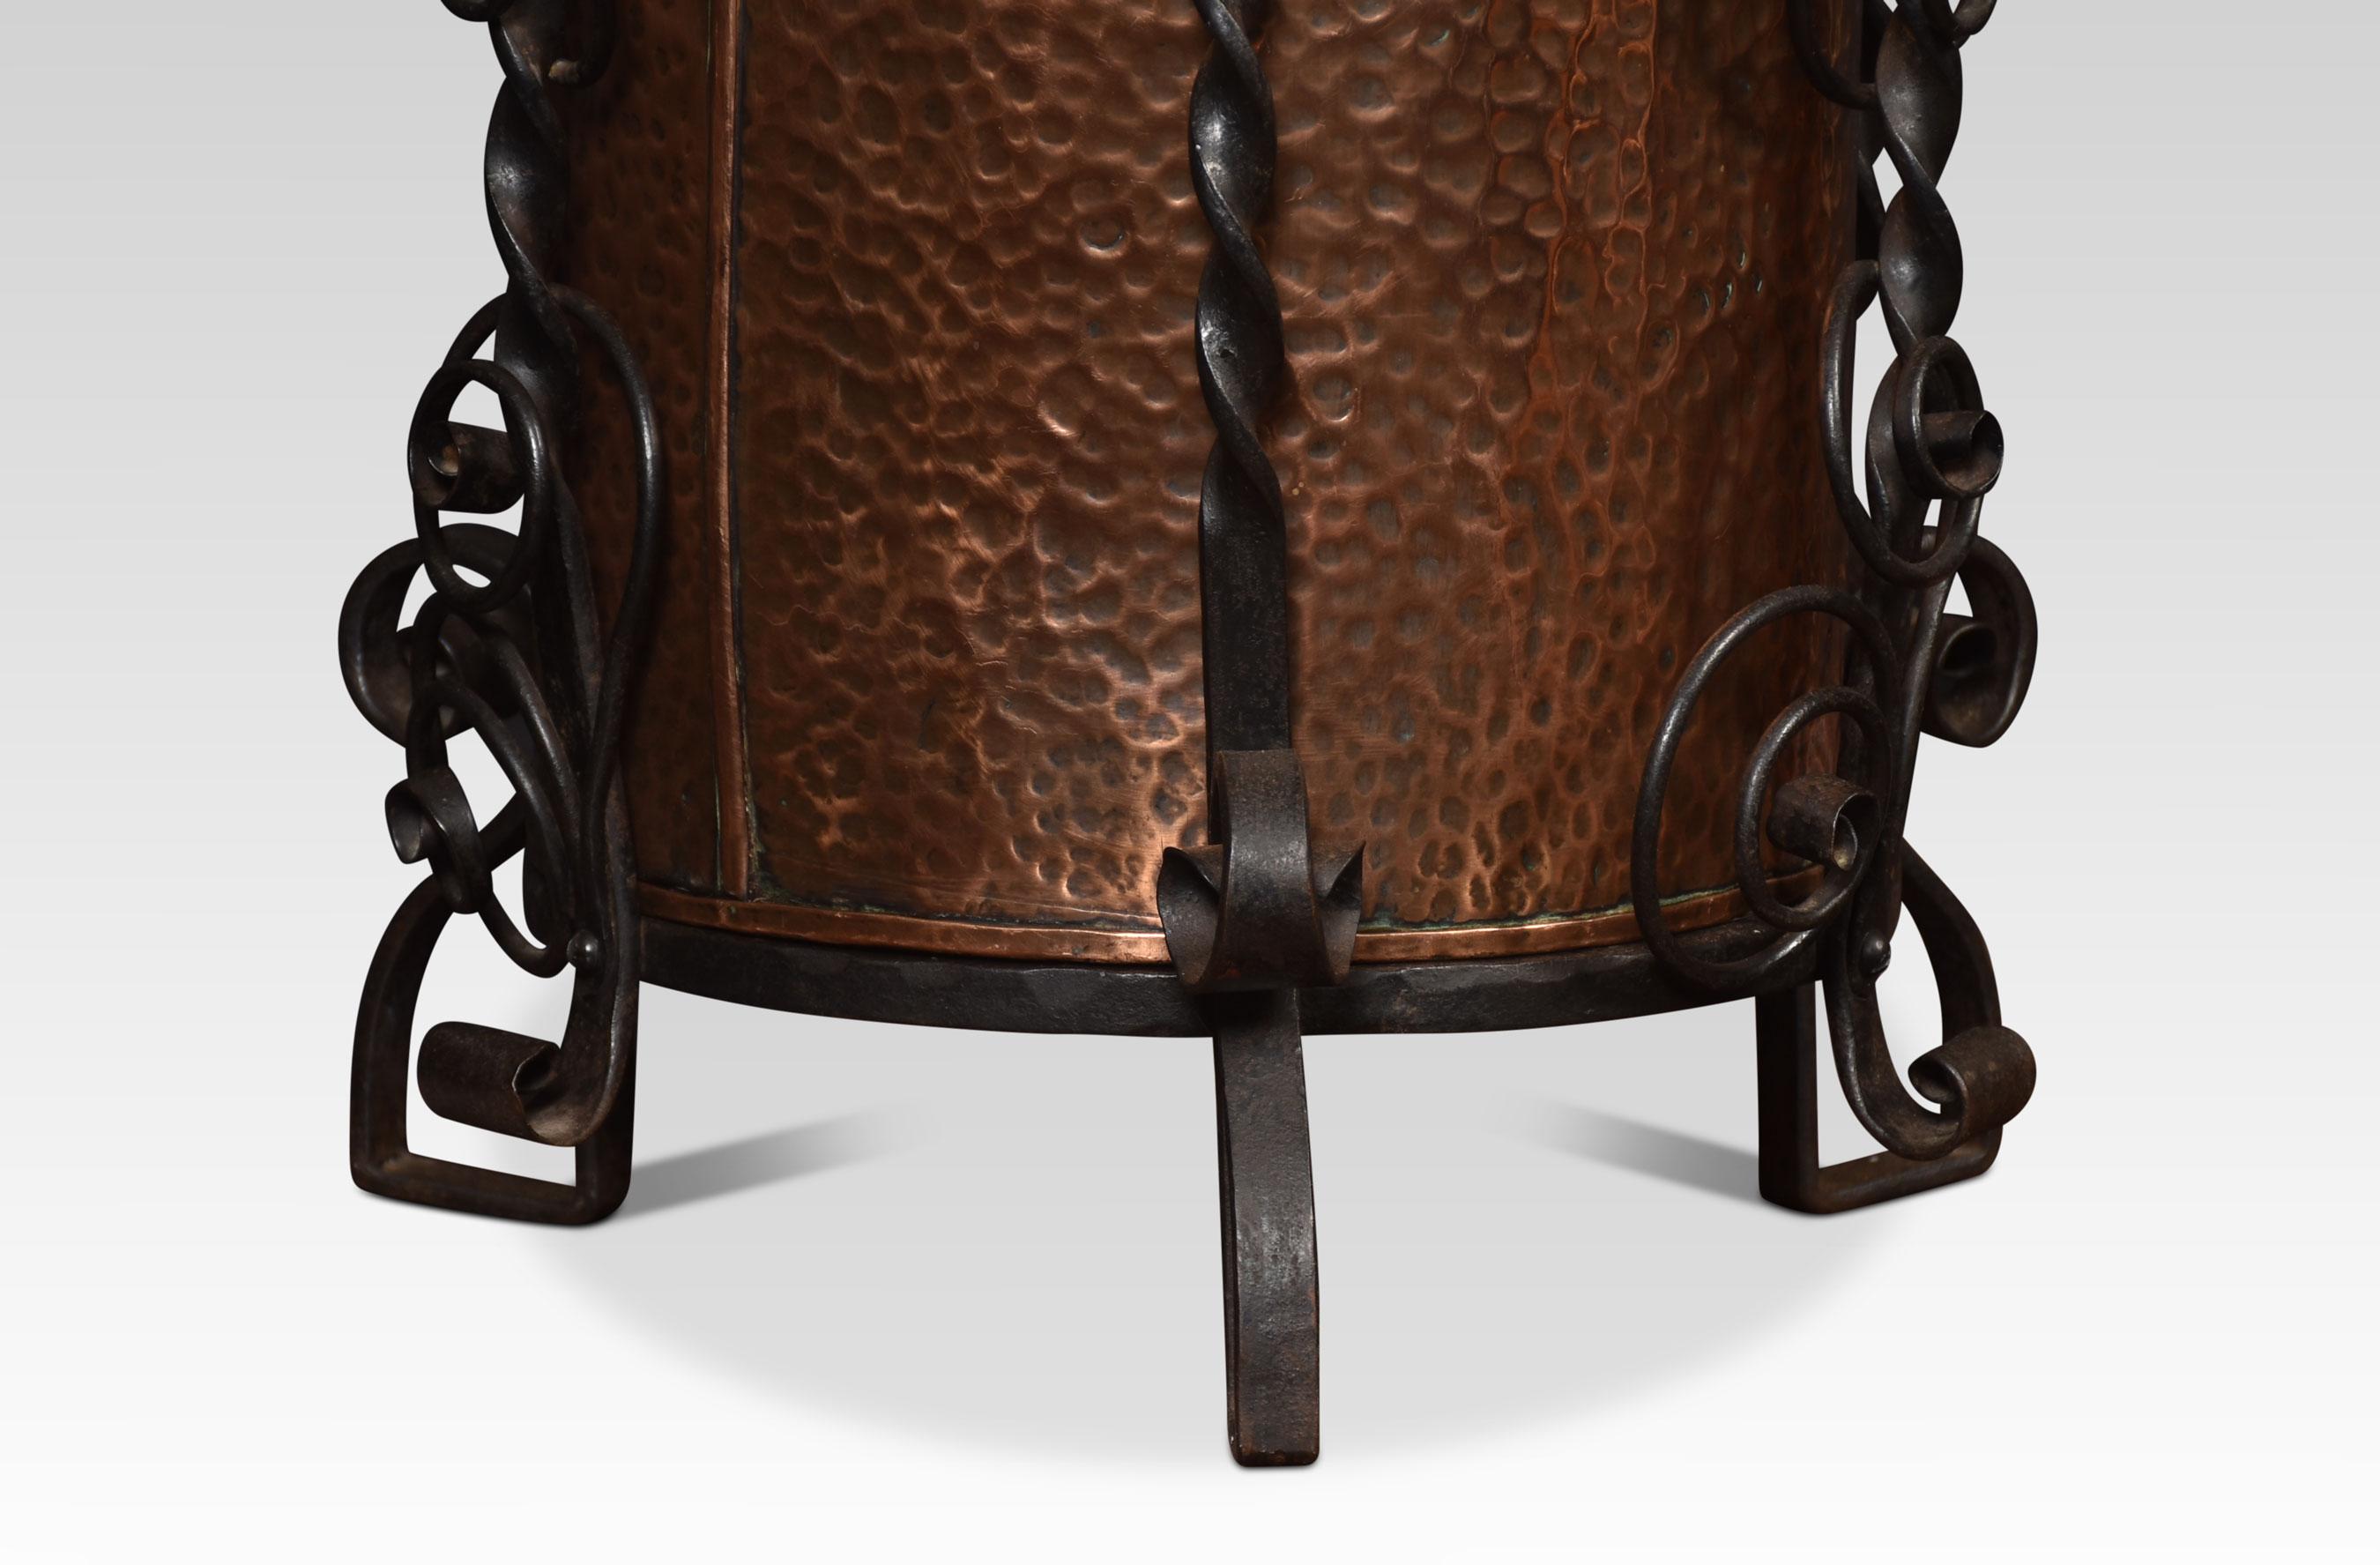 Arts and Crafts hand-planished circular copper coal bucket within a protective black wrought-iron stand, to the dome-topped lid decorated in repoussé style with flowerheads above the cylindrical planished body. All raised up on three shaped